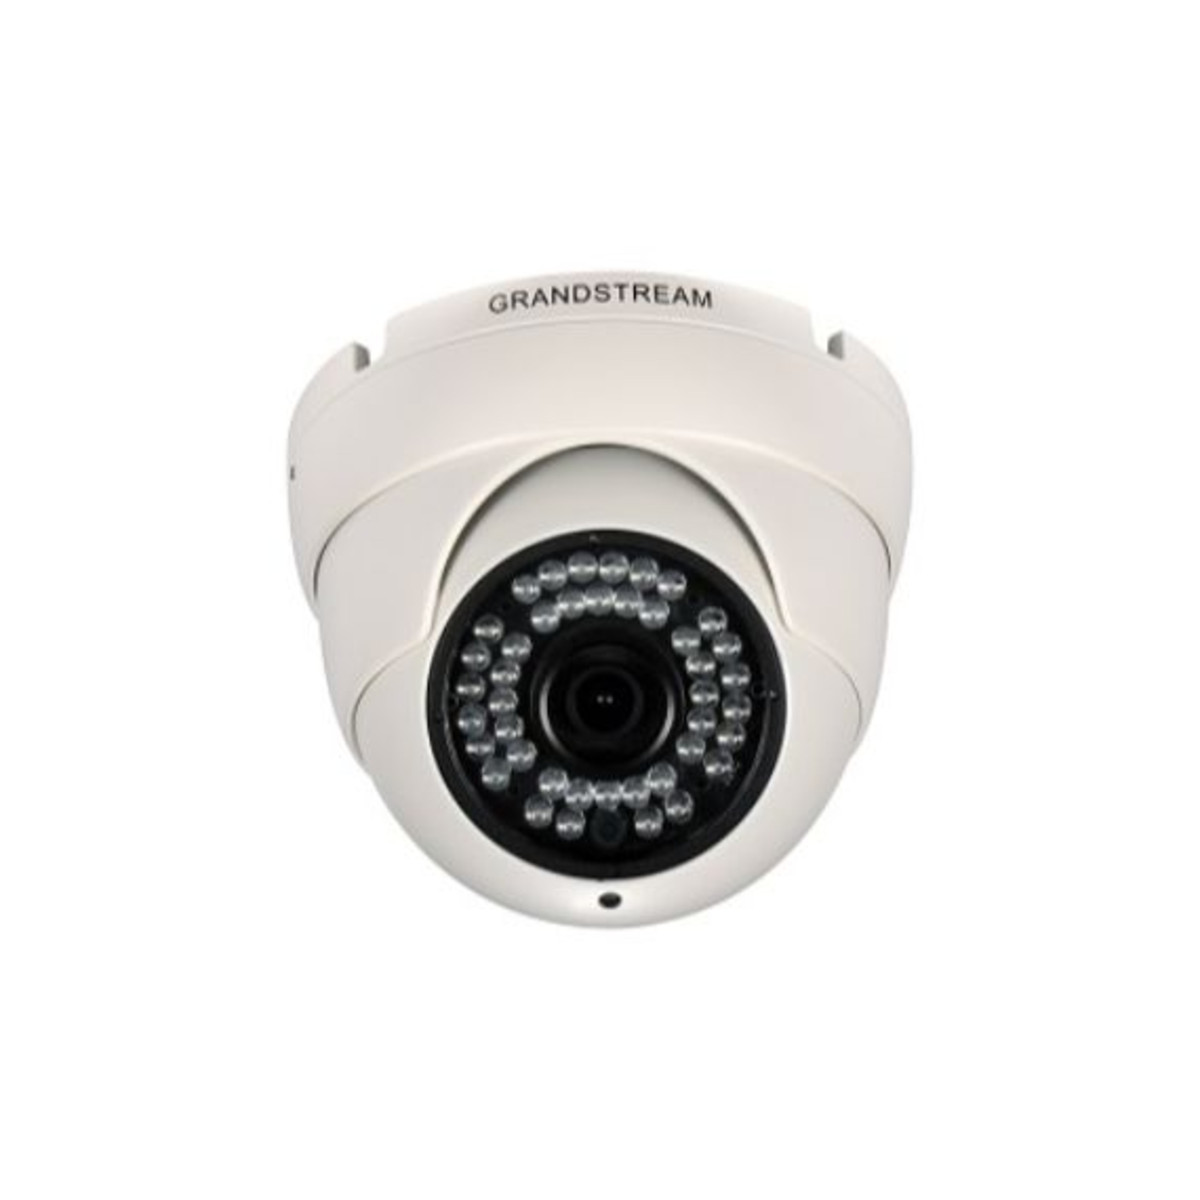 GrandStream FHD 3.1 Mp Infrared Fixed Dome FHD IP Video Camera (p/n- GXV3610)